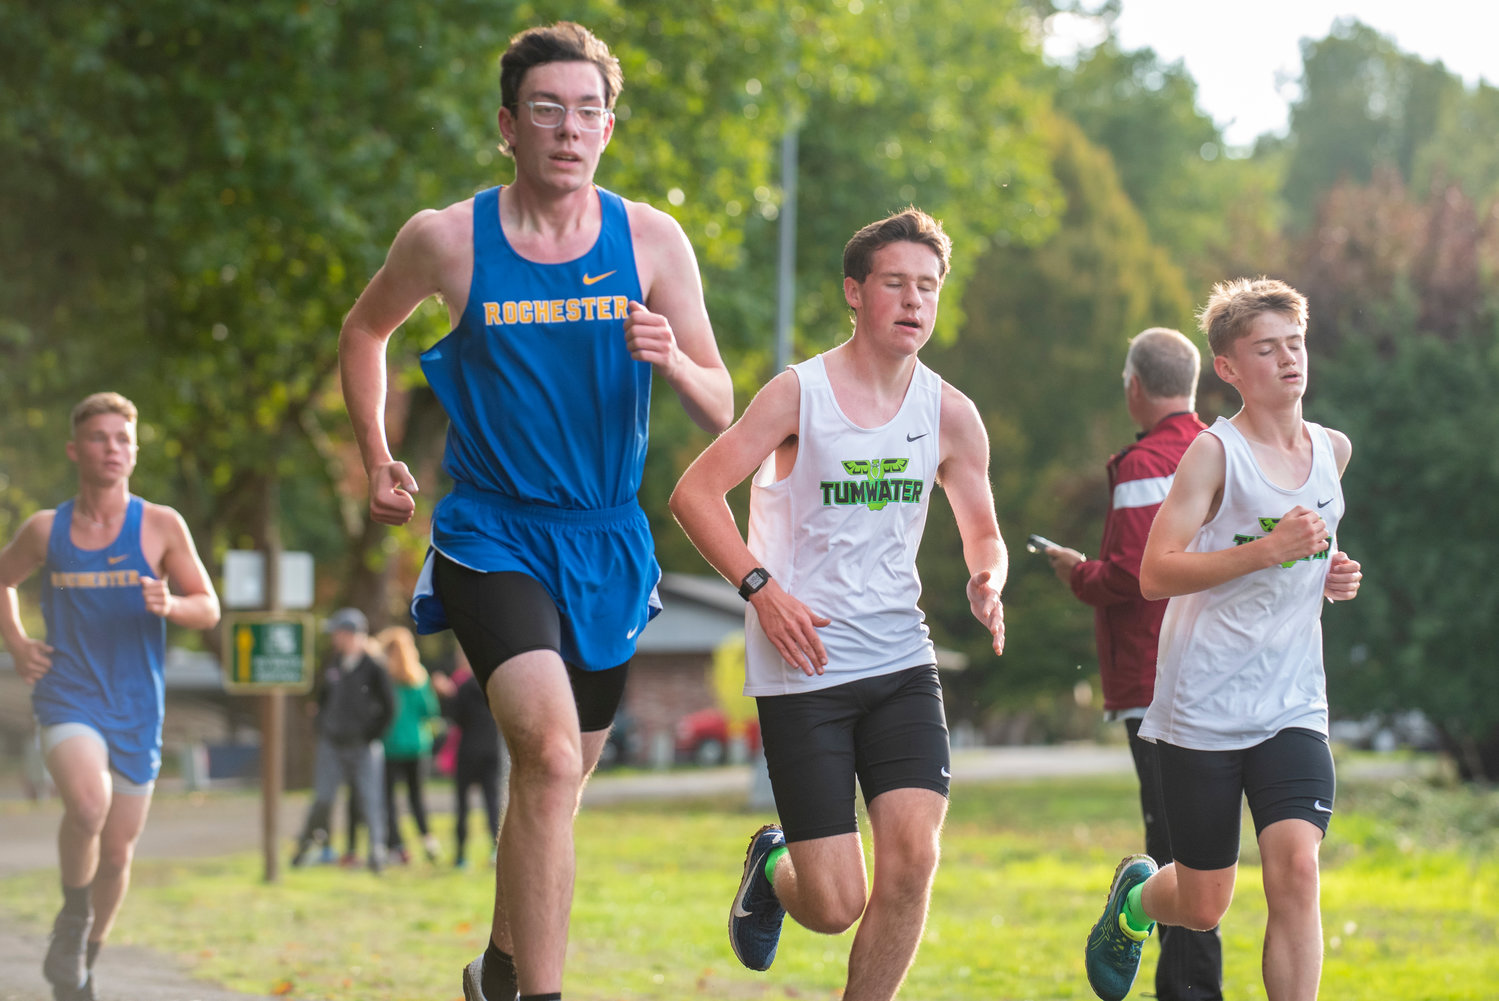 Rochester's William Morton, second from left, competes in a three-team meet at Stan Hedwall Park on Wednesday, Oct. 6, 2021.